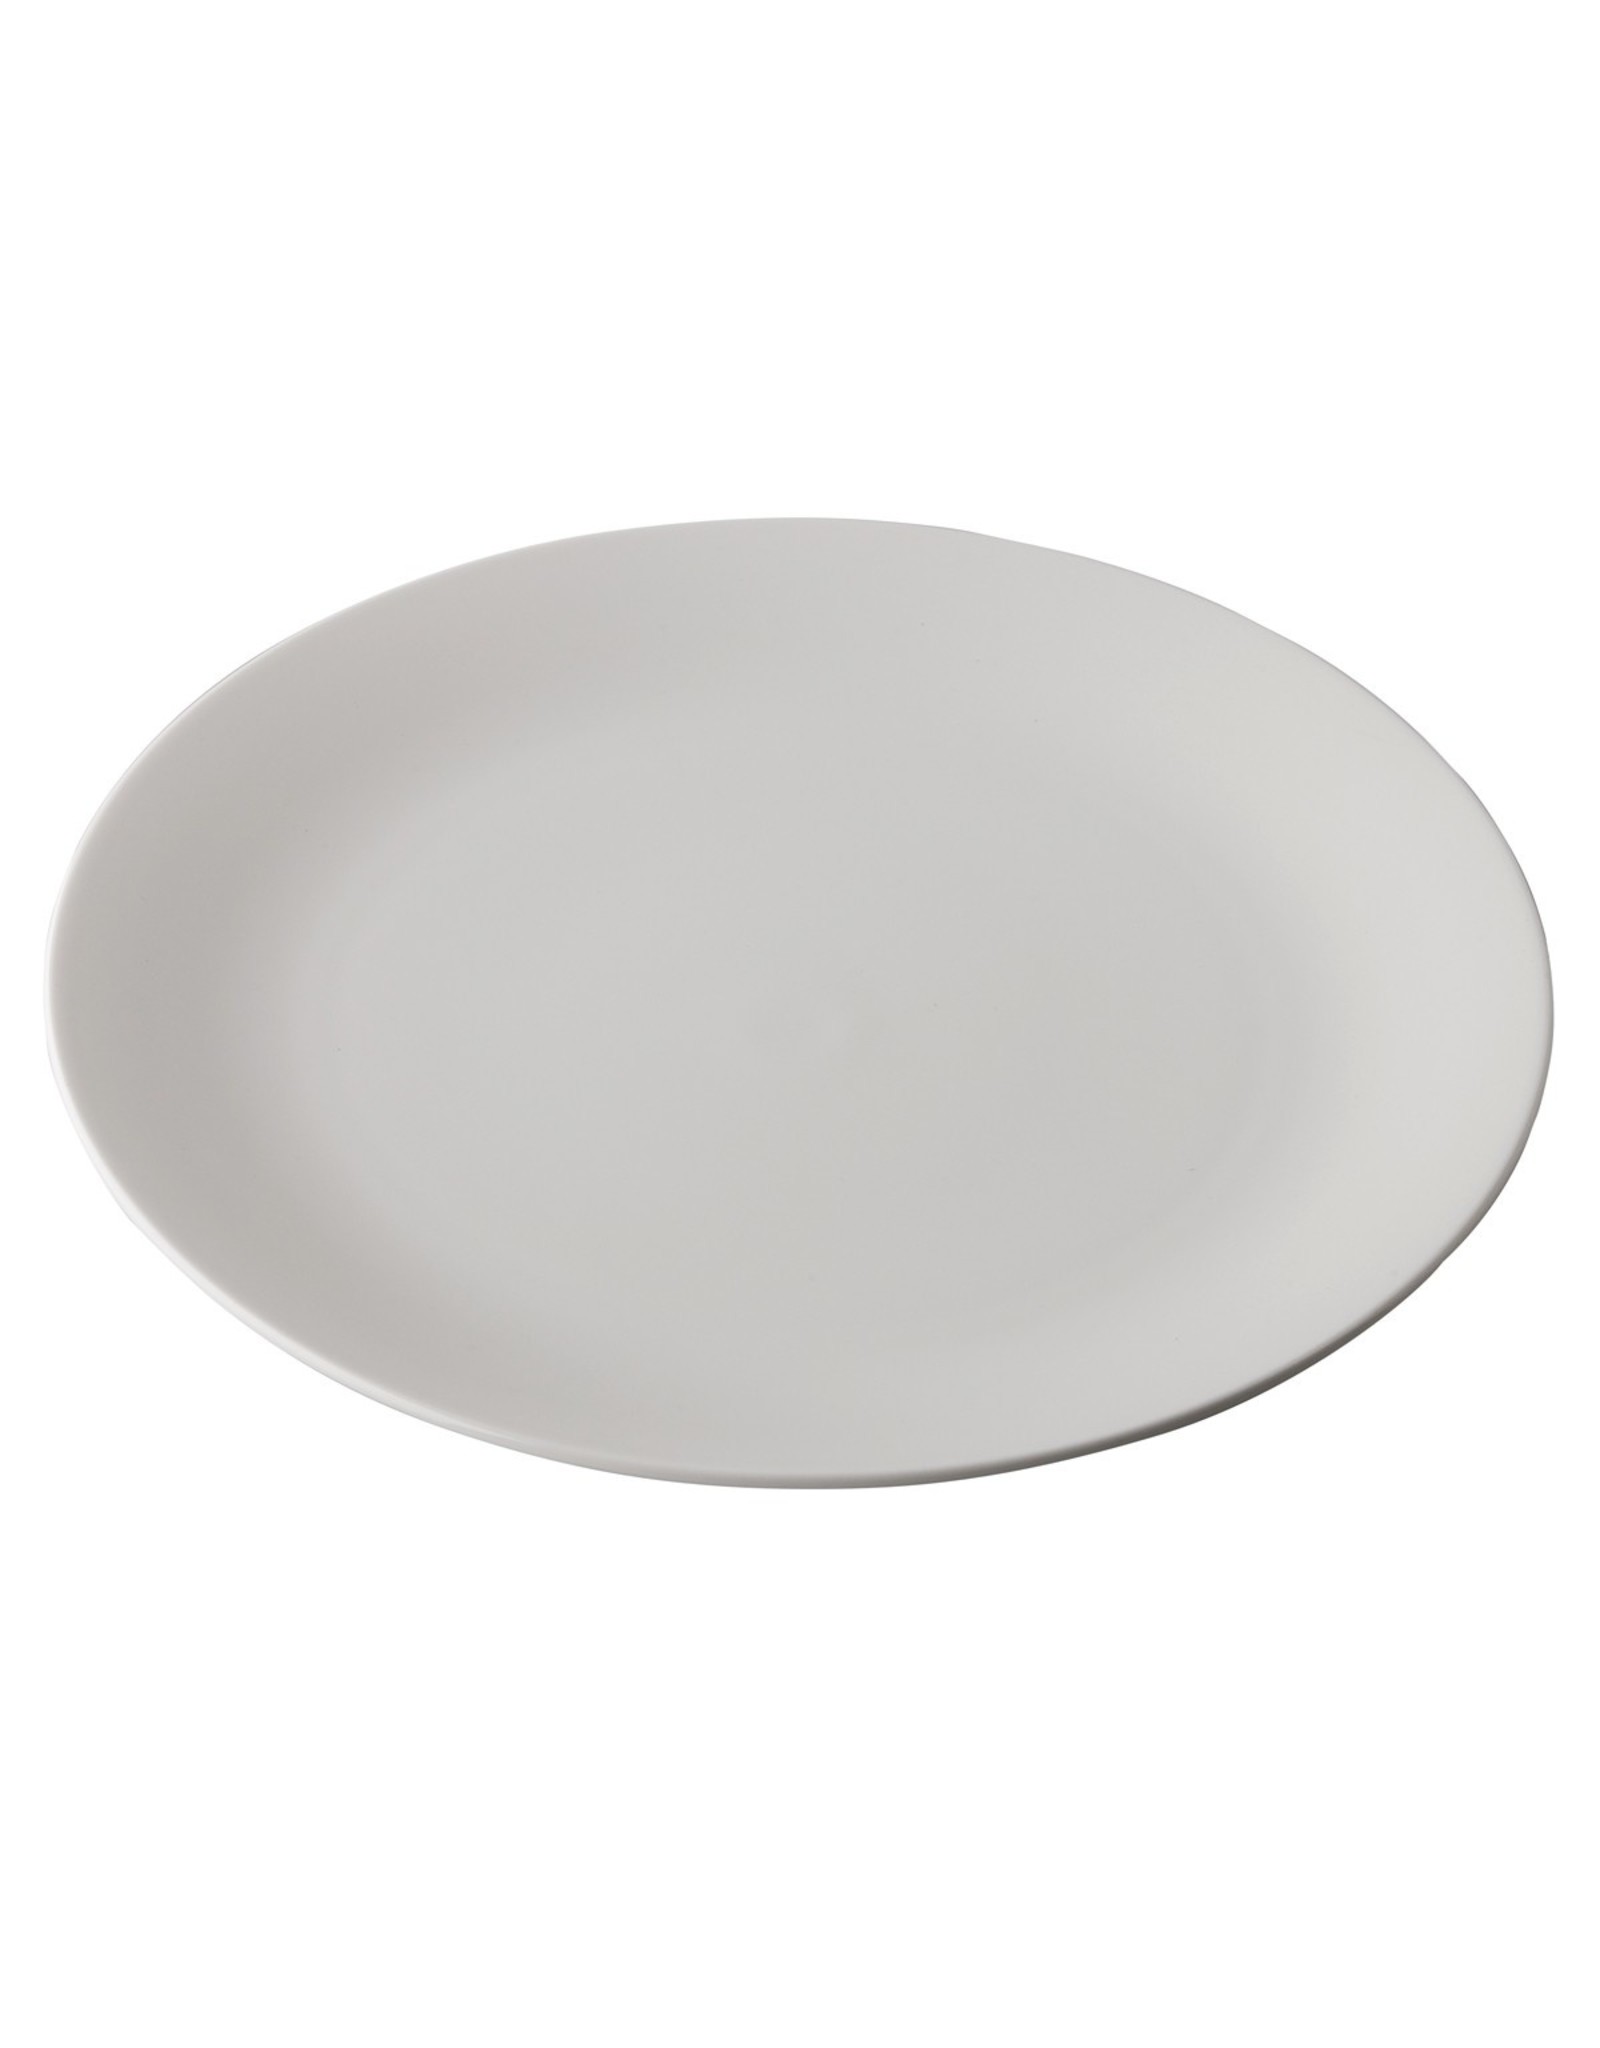 Stylepoint Q Fine China coupe plate 21,6 cm